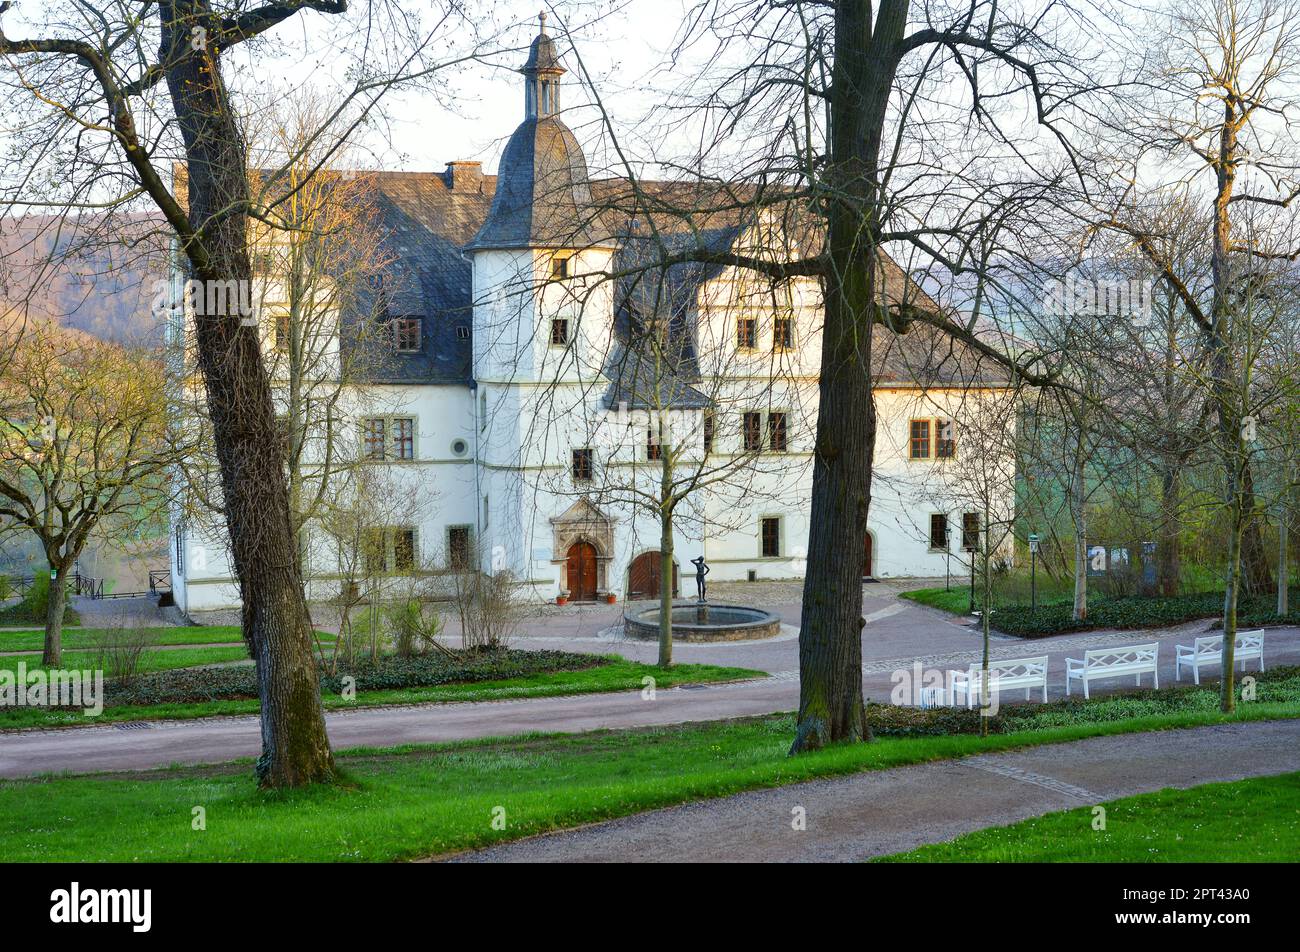 Dornburg castle palace in Germany, beautiful view in spring season Stock Photo